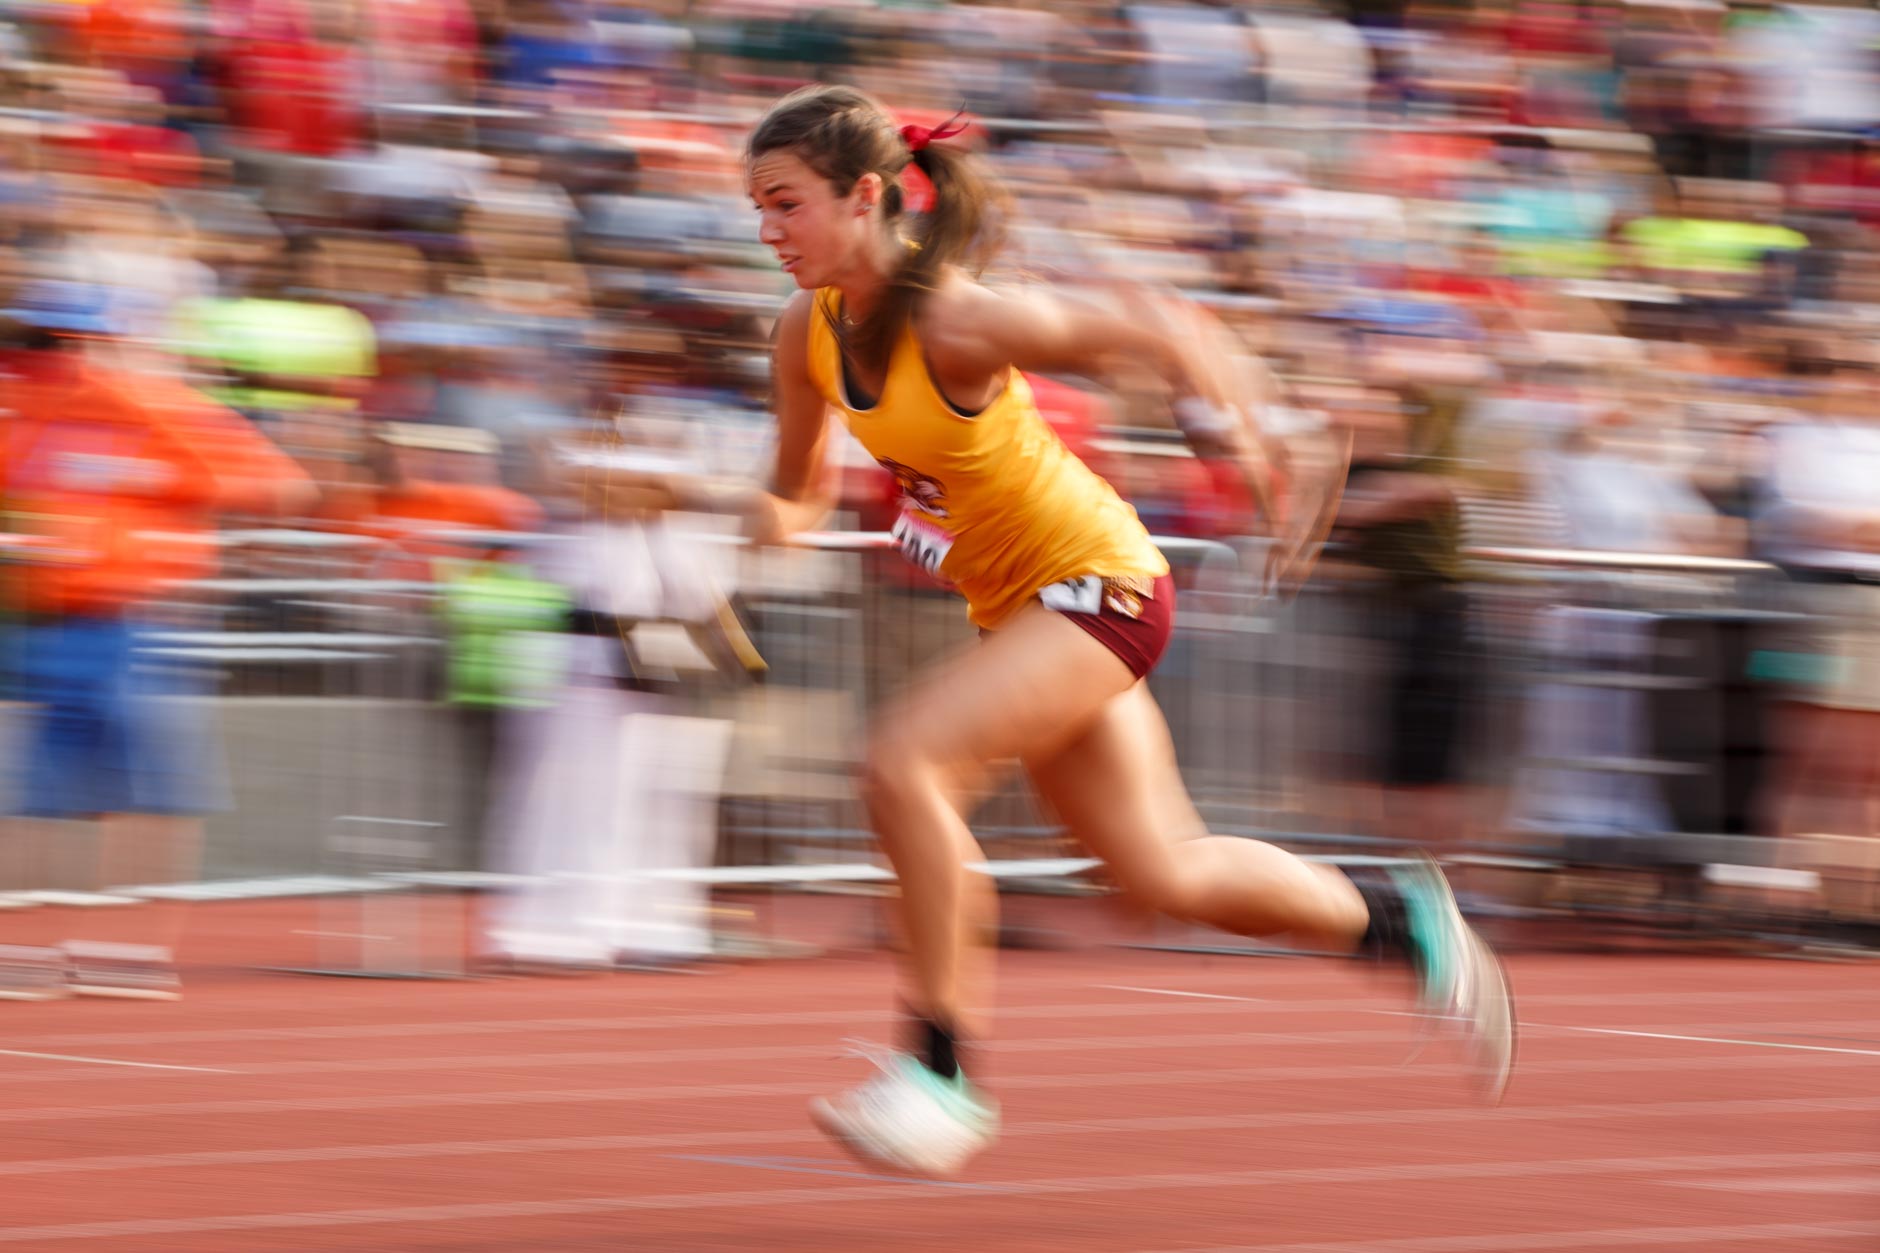 Bloomington's Taylor Storm competes in the 4x100 meter relay during the IHSAA Girls Track and Field State Finals in Bloomington, Indiana on Saturday, June 1, 2019. (James Brosher for The Herald-Times)